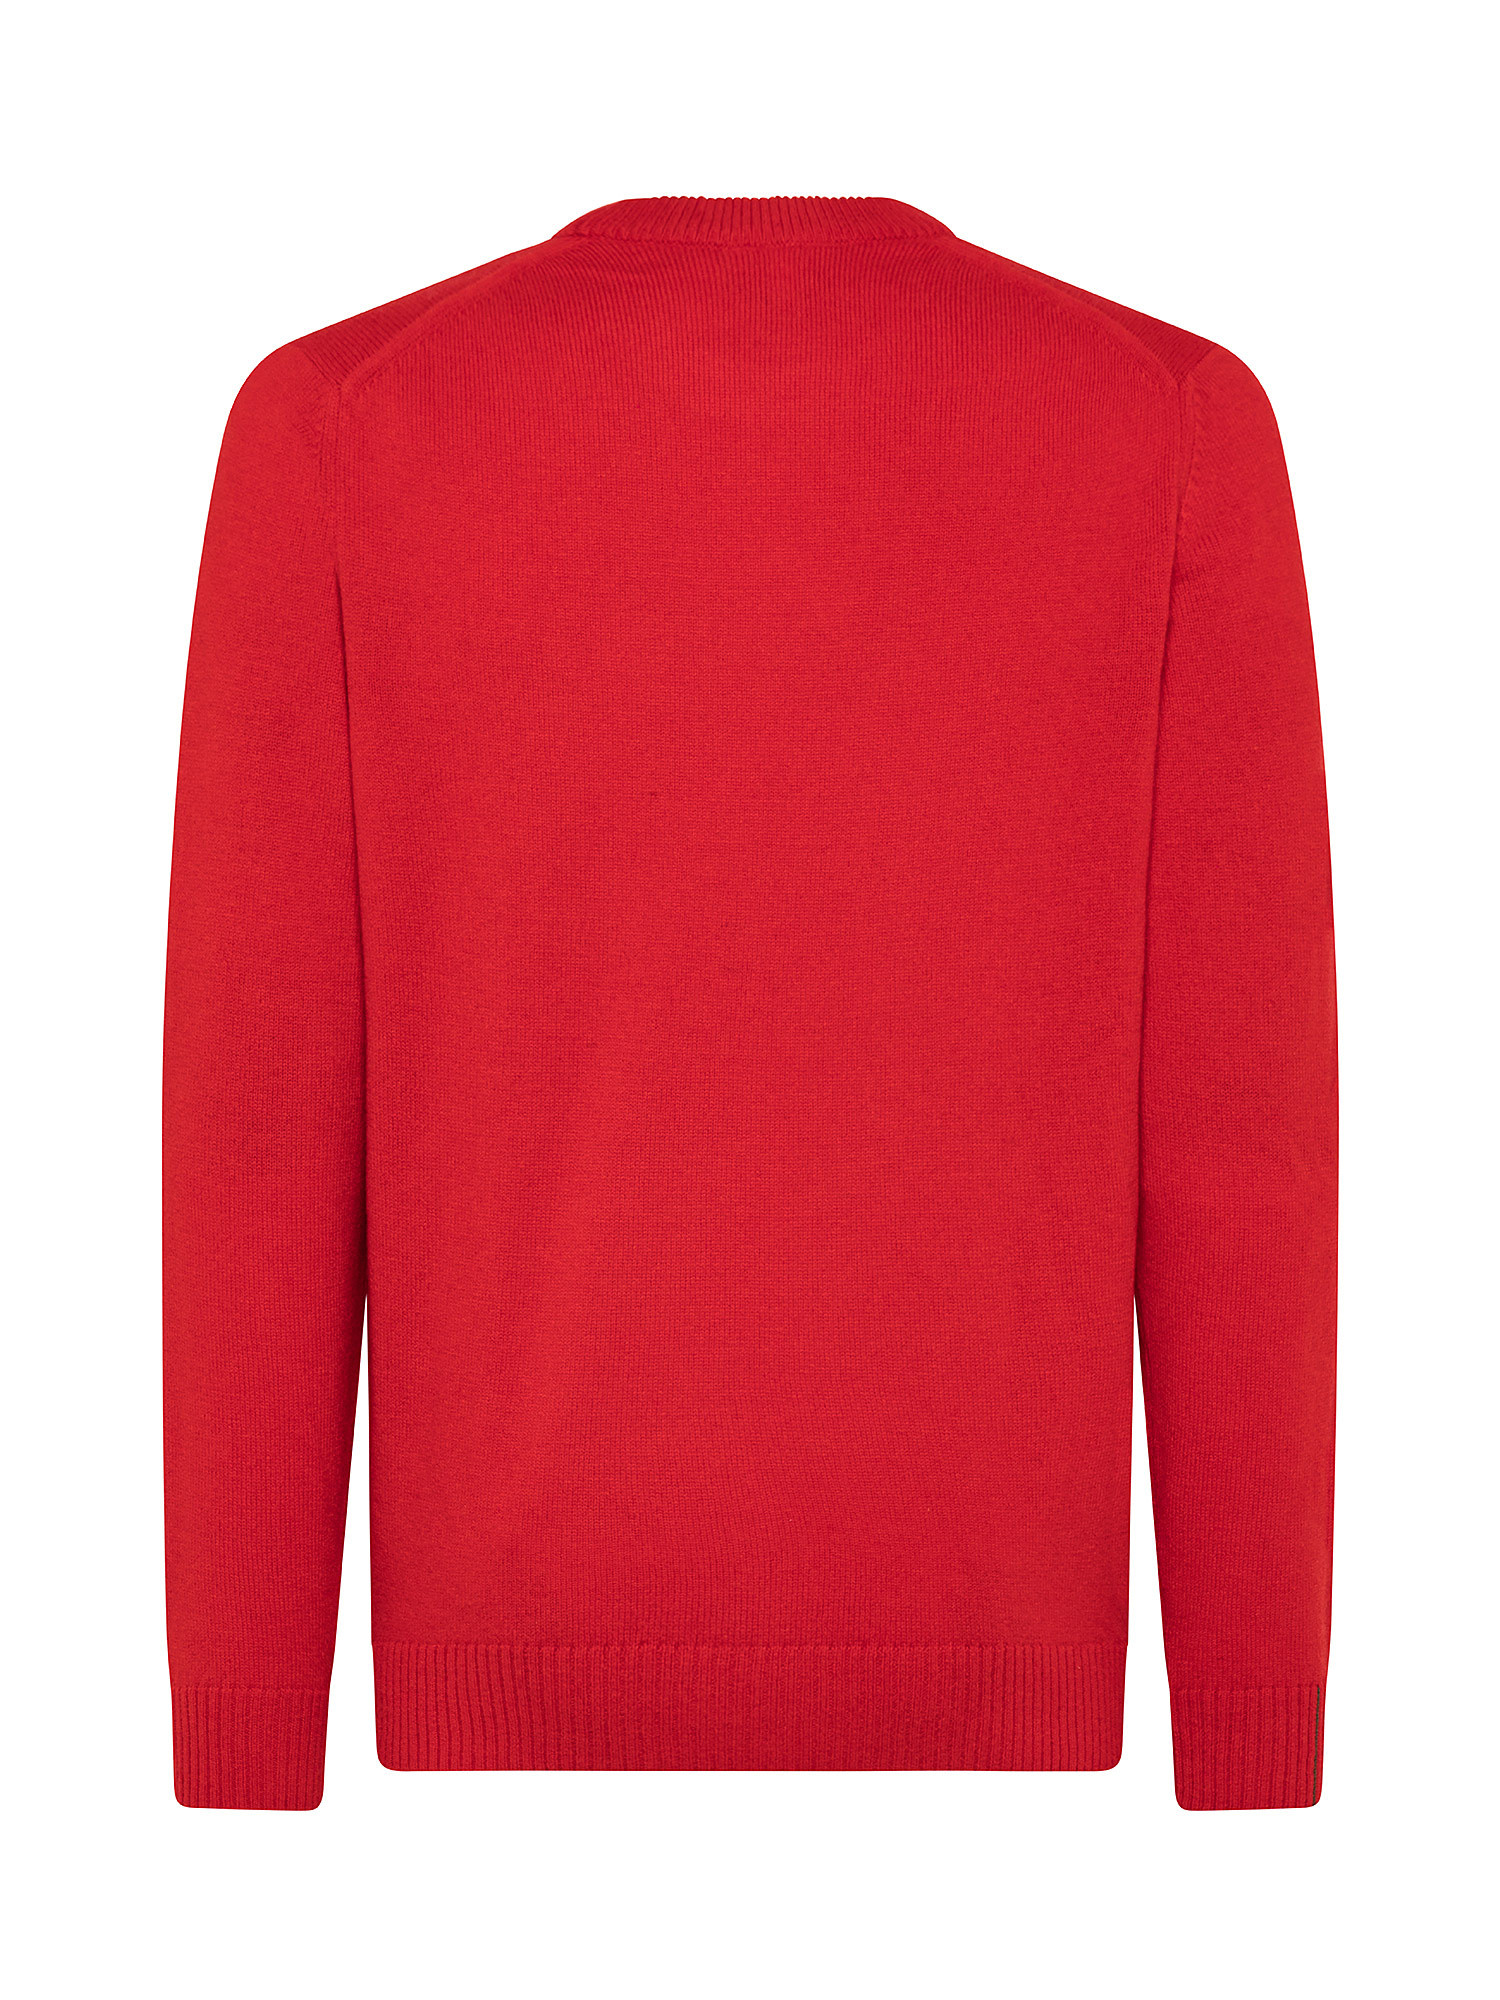 Men's organic cotton crew neck sweater, Red, large image number 1